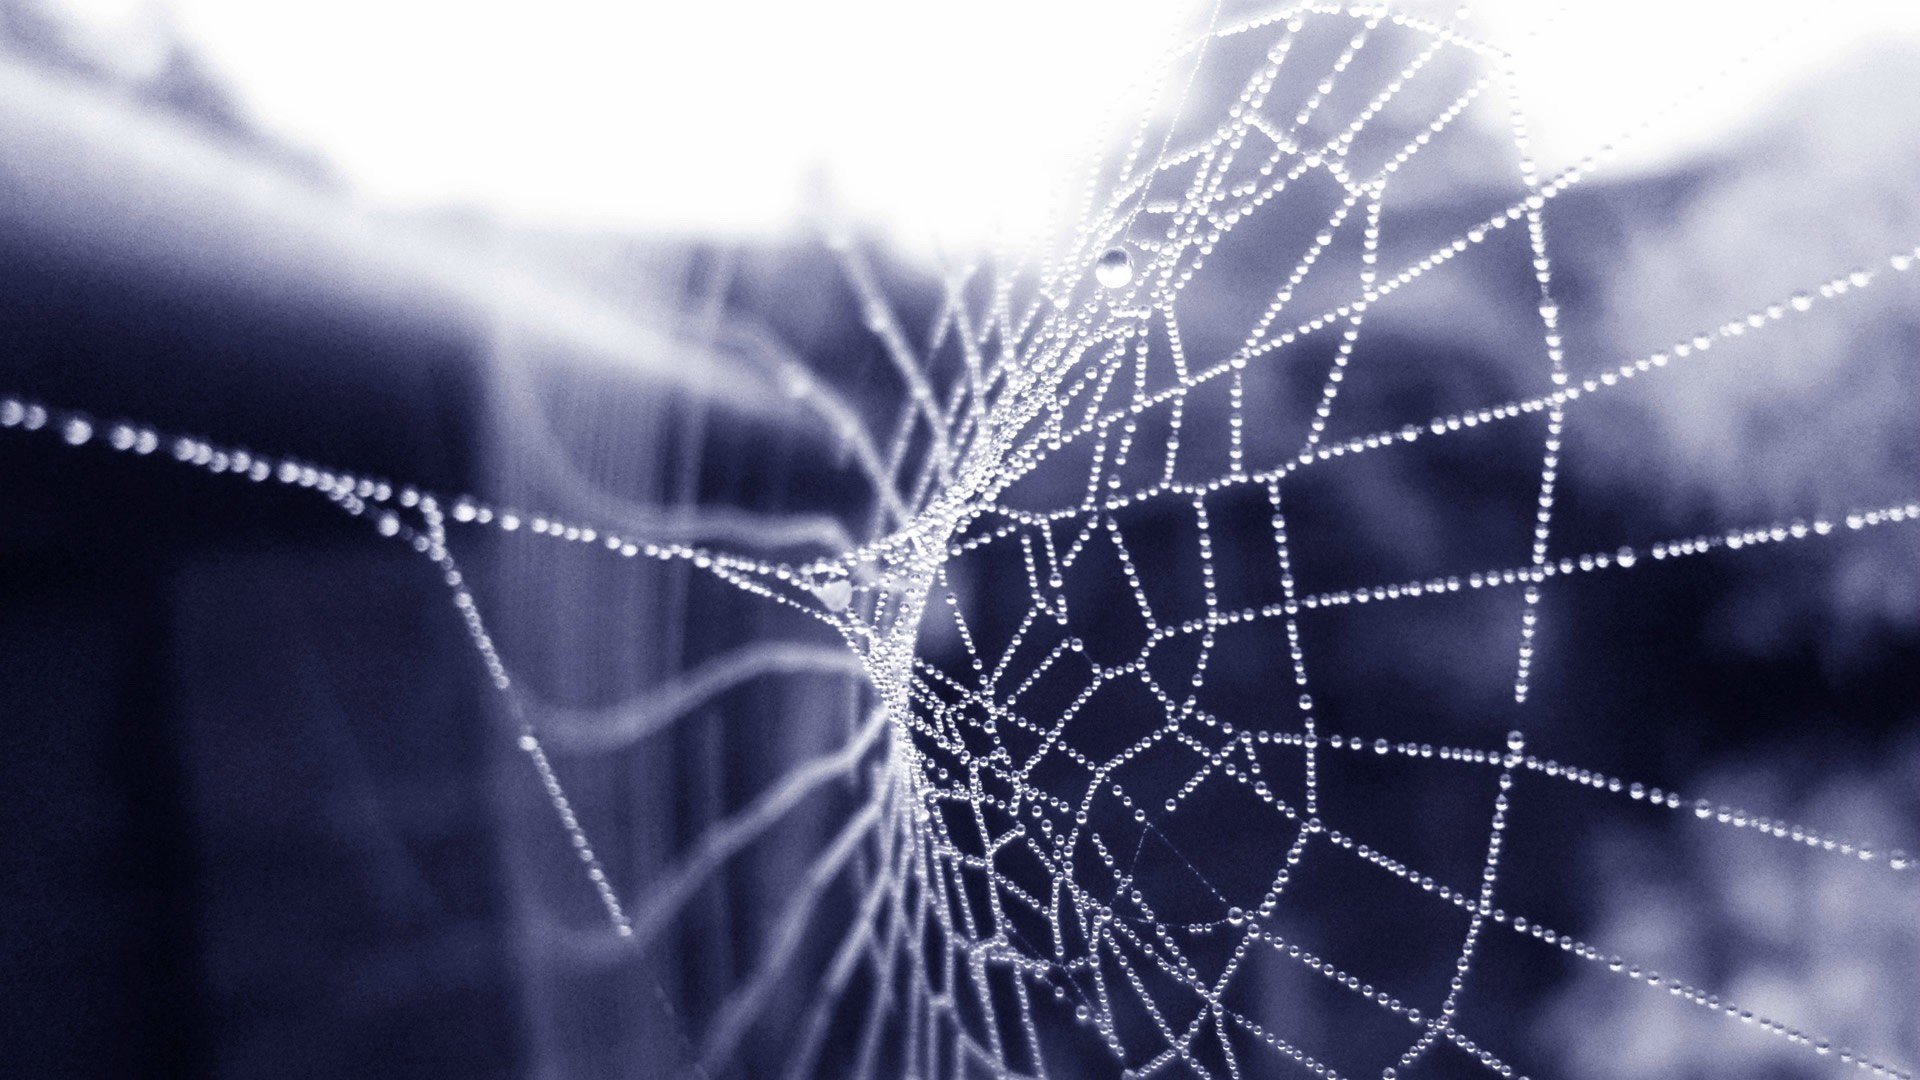 Awesome Spider Web free wallpaper ID:184810 for hd 1920x1080 desktop